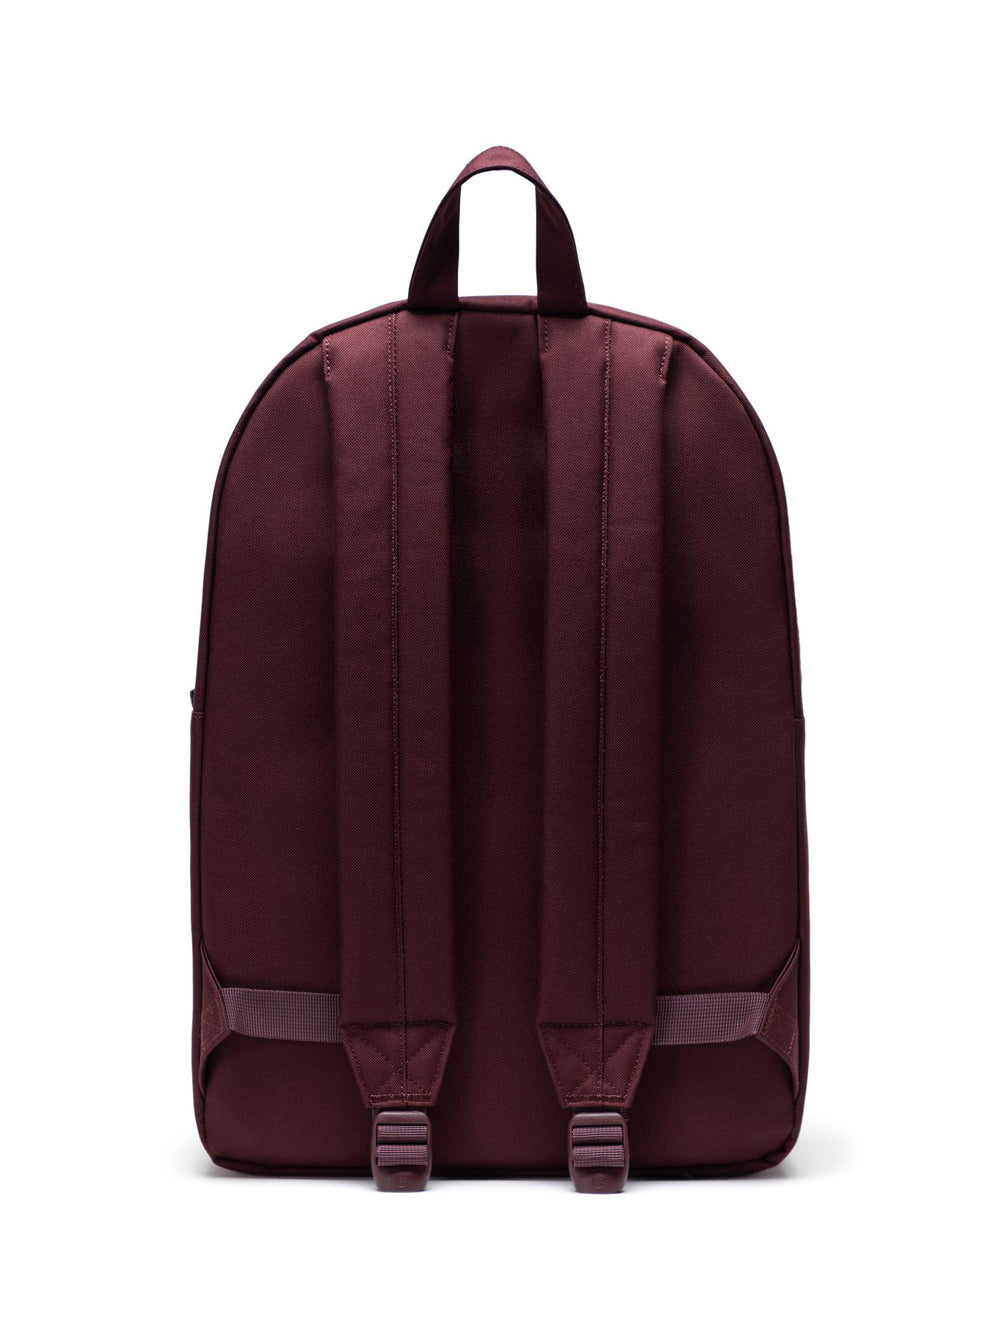 HERSCHEL SUPPLY CO. MIDWAY 25L BACKPACK - PLUM/ASH ROS - CLEARANCE